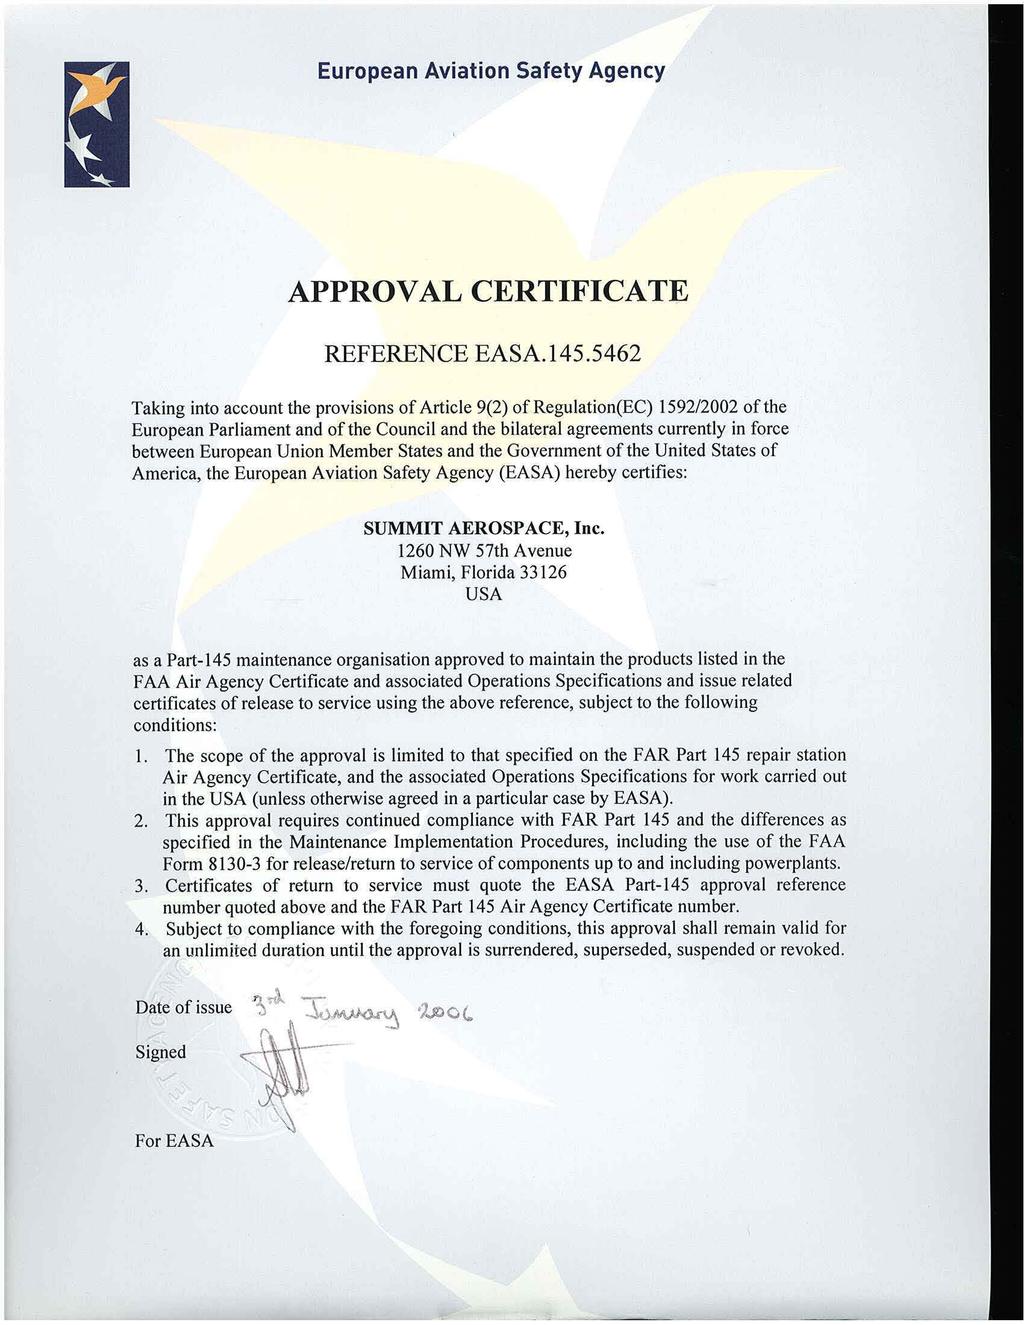 European Aviation Safety Agency APPROVAL CERTIFICATE REFERENCE EASA.145.